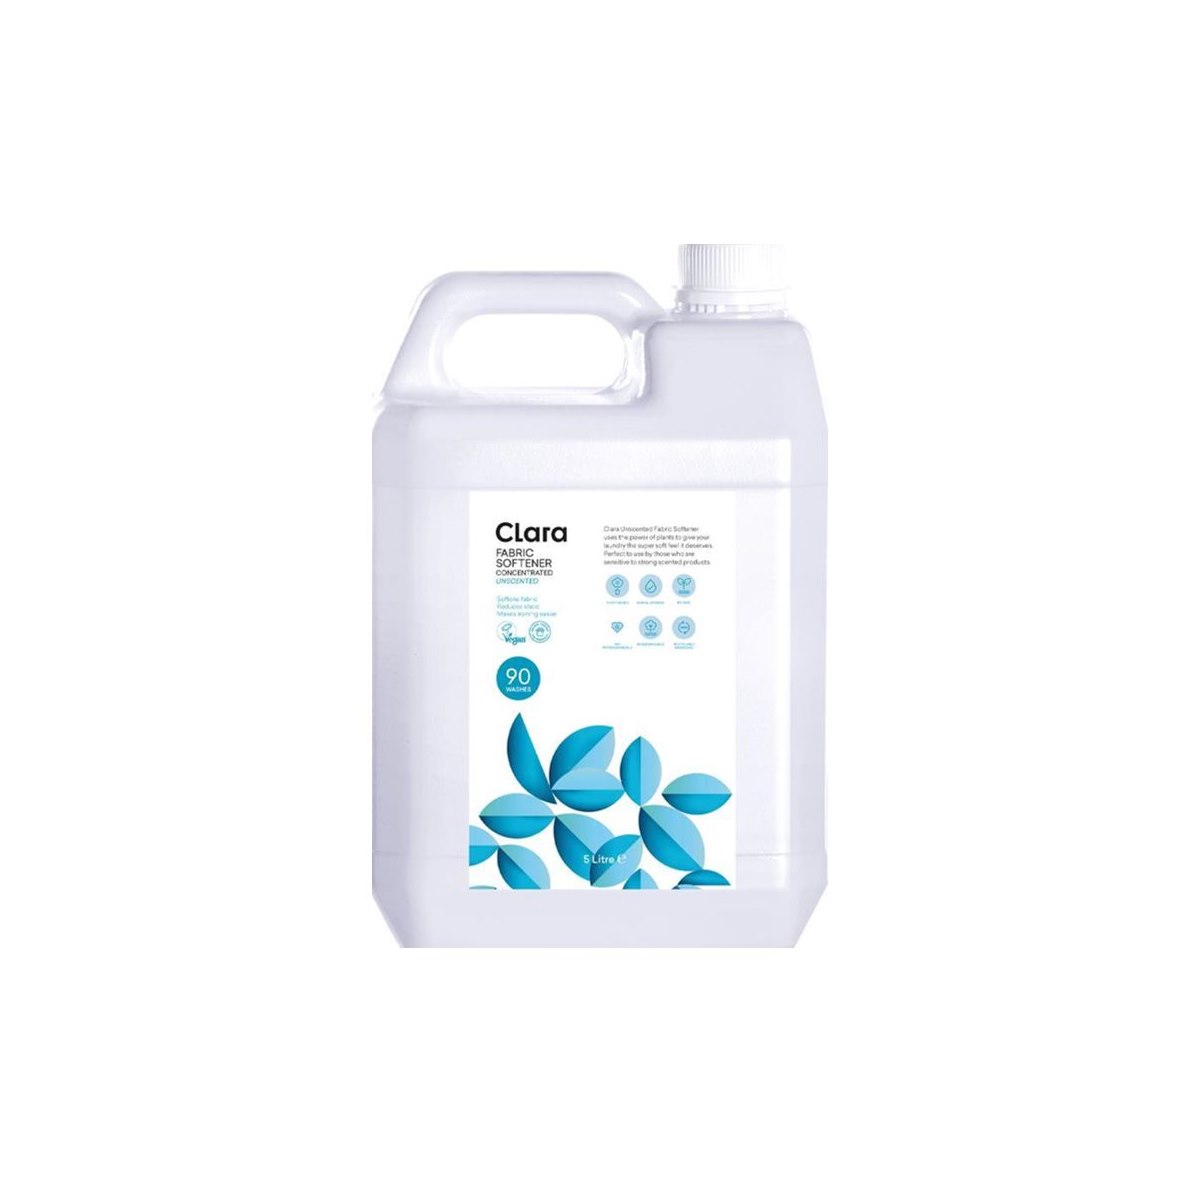 Clara Concentrated Fabric Softener Unscented 5L